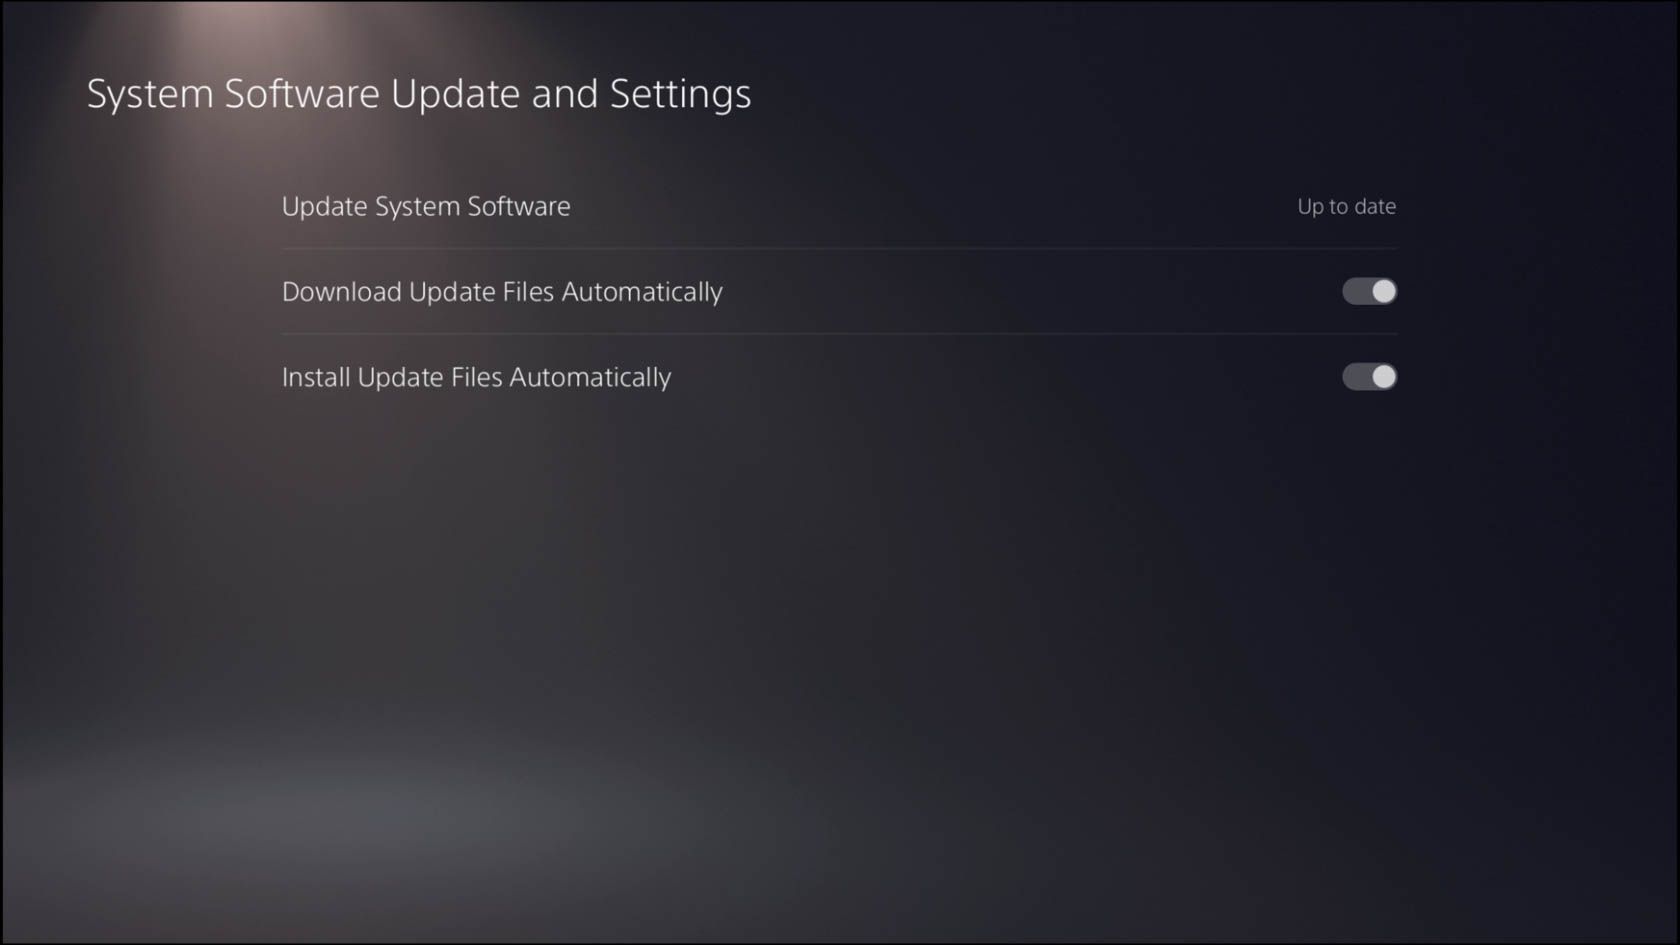 System software update and settings on PS5